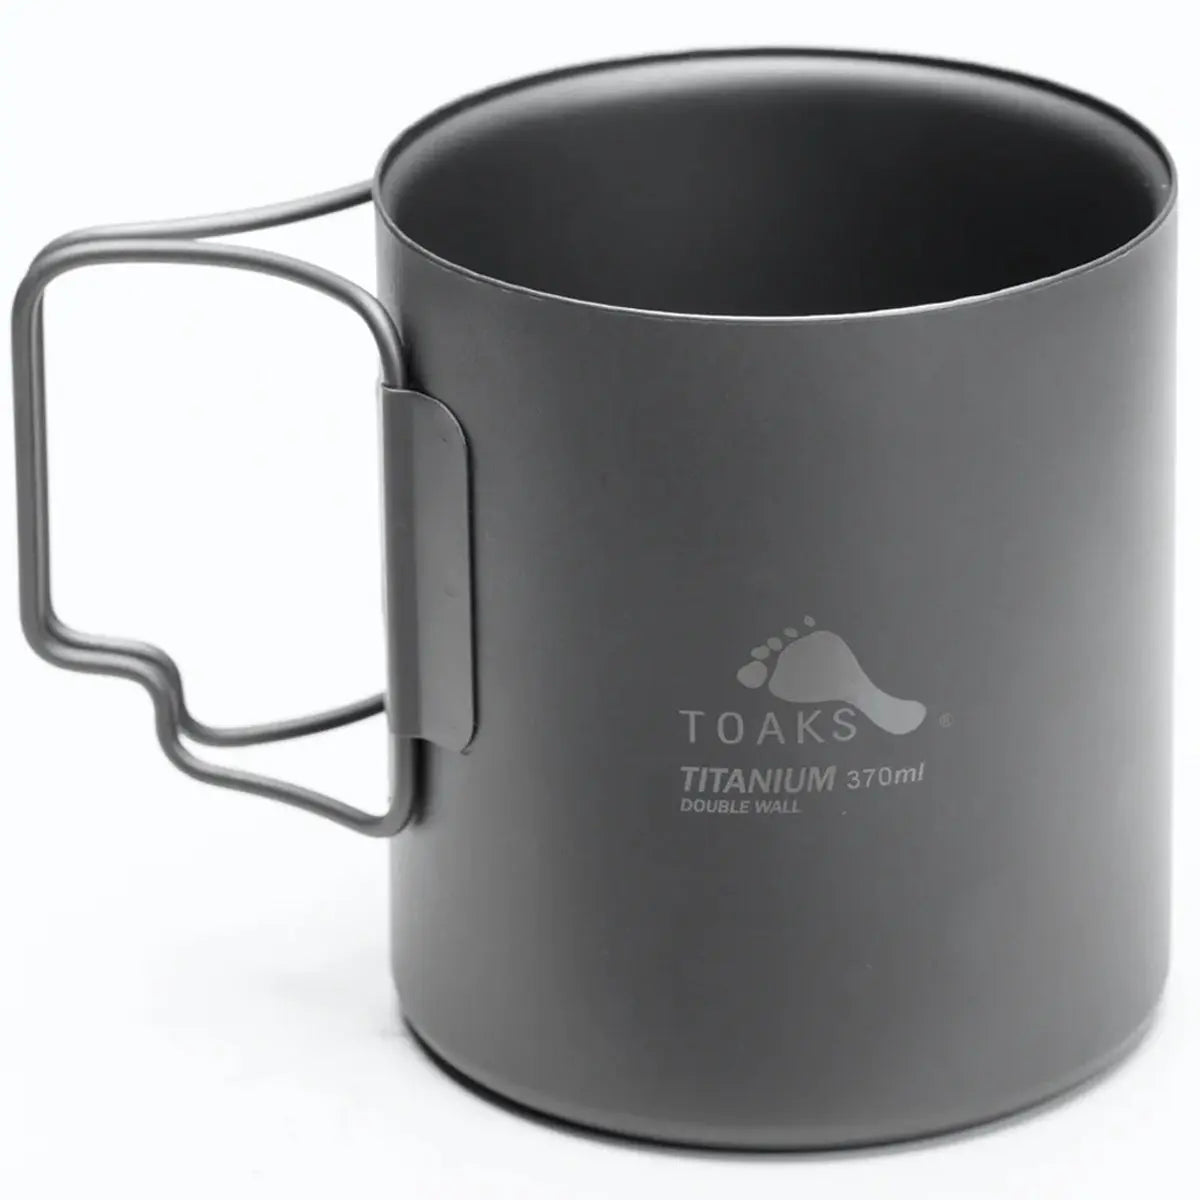 TOAKS Titanium Lightweight 370ml Double Wall Cup CUP-370-DW - Outdoor Camping Toaks